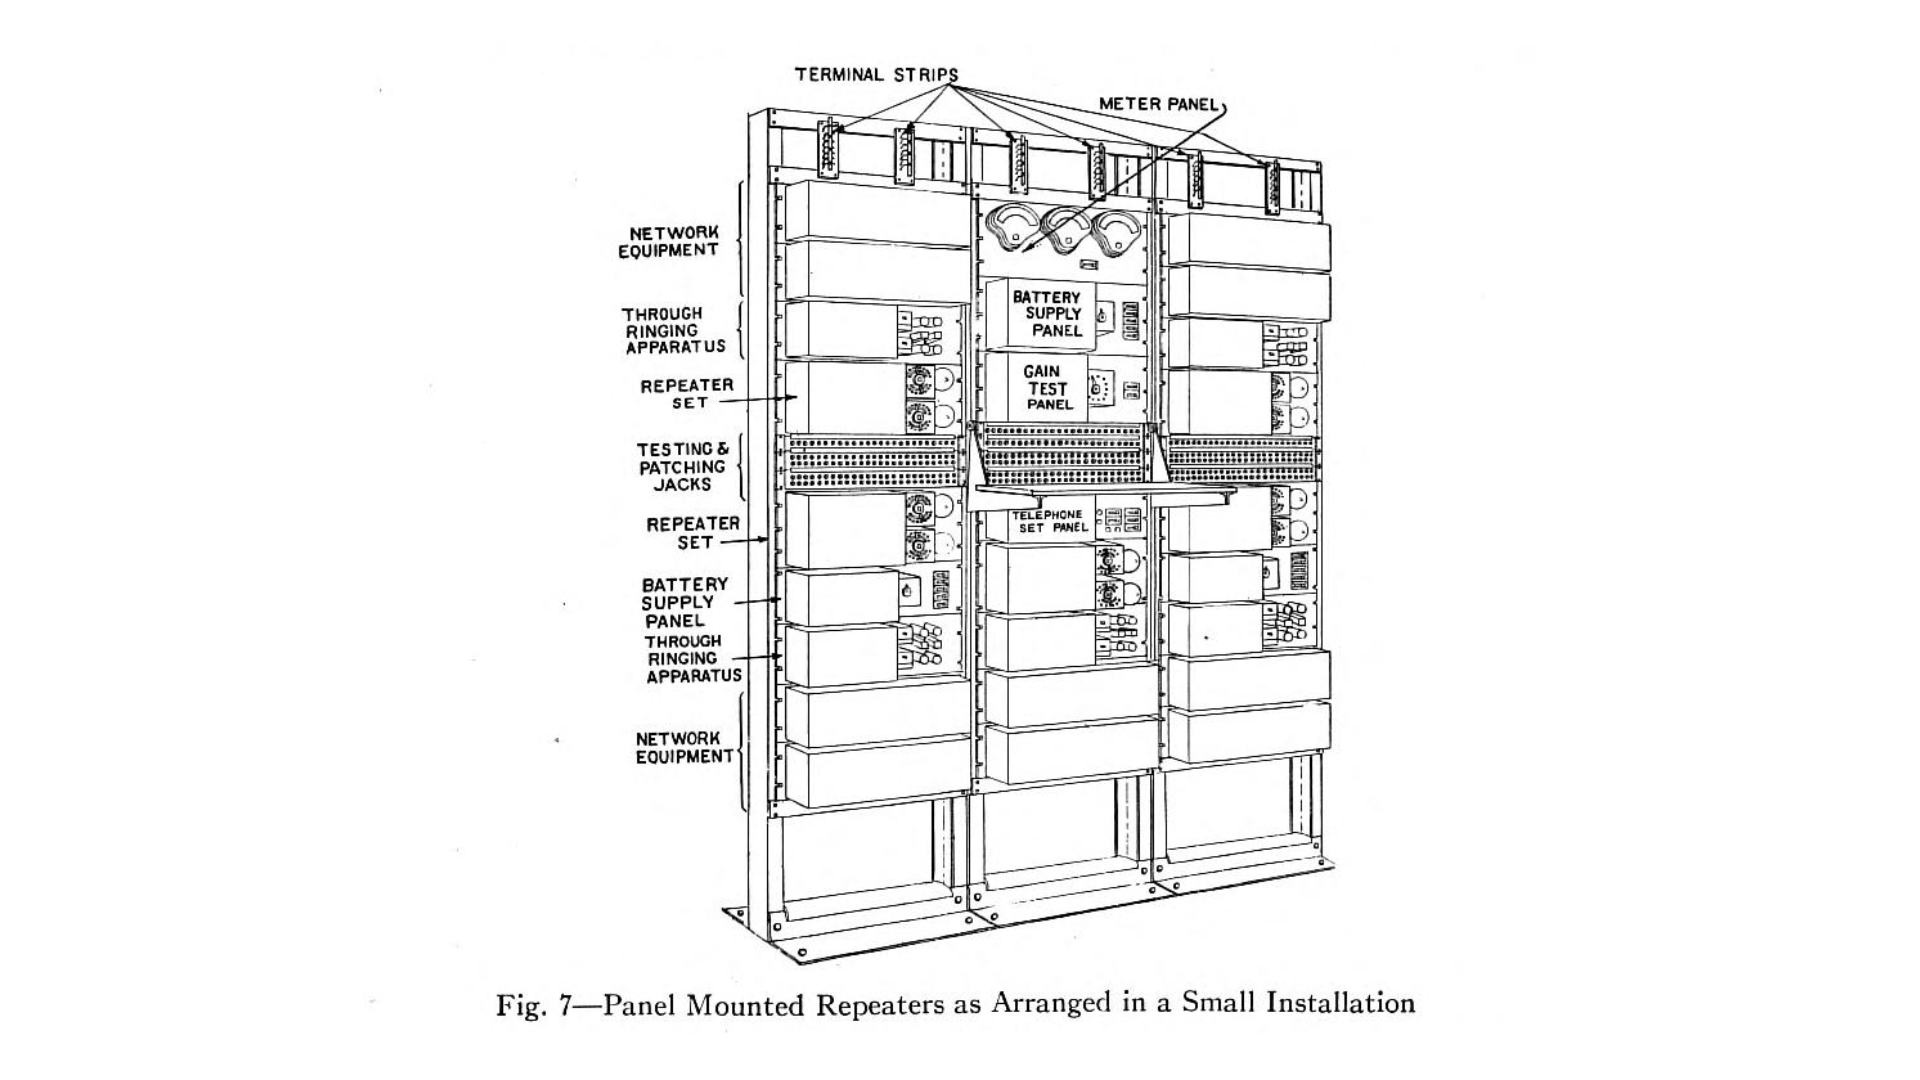 Bell System Technical Journal, 2: 3. July 1923, p.118.